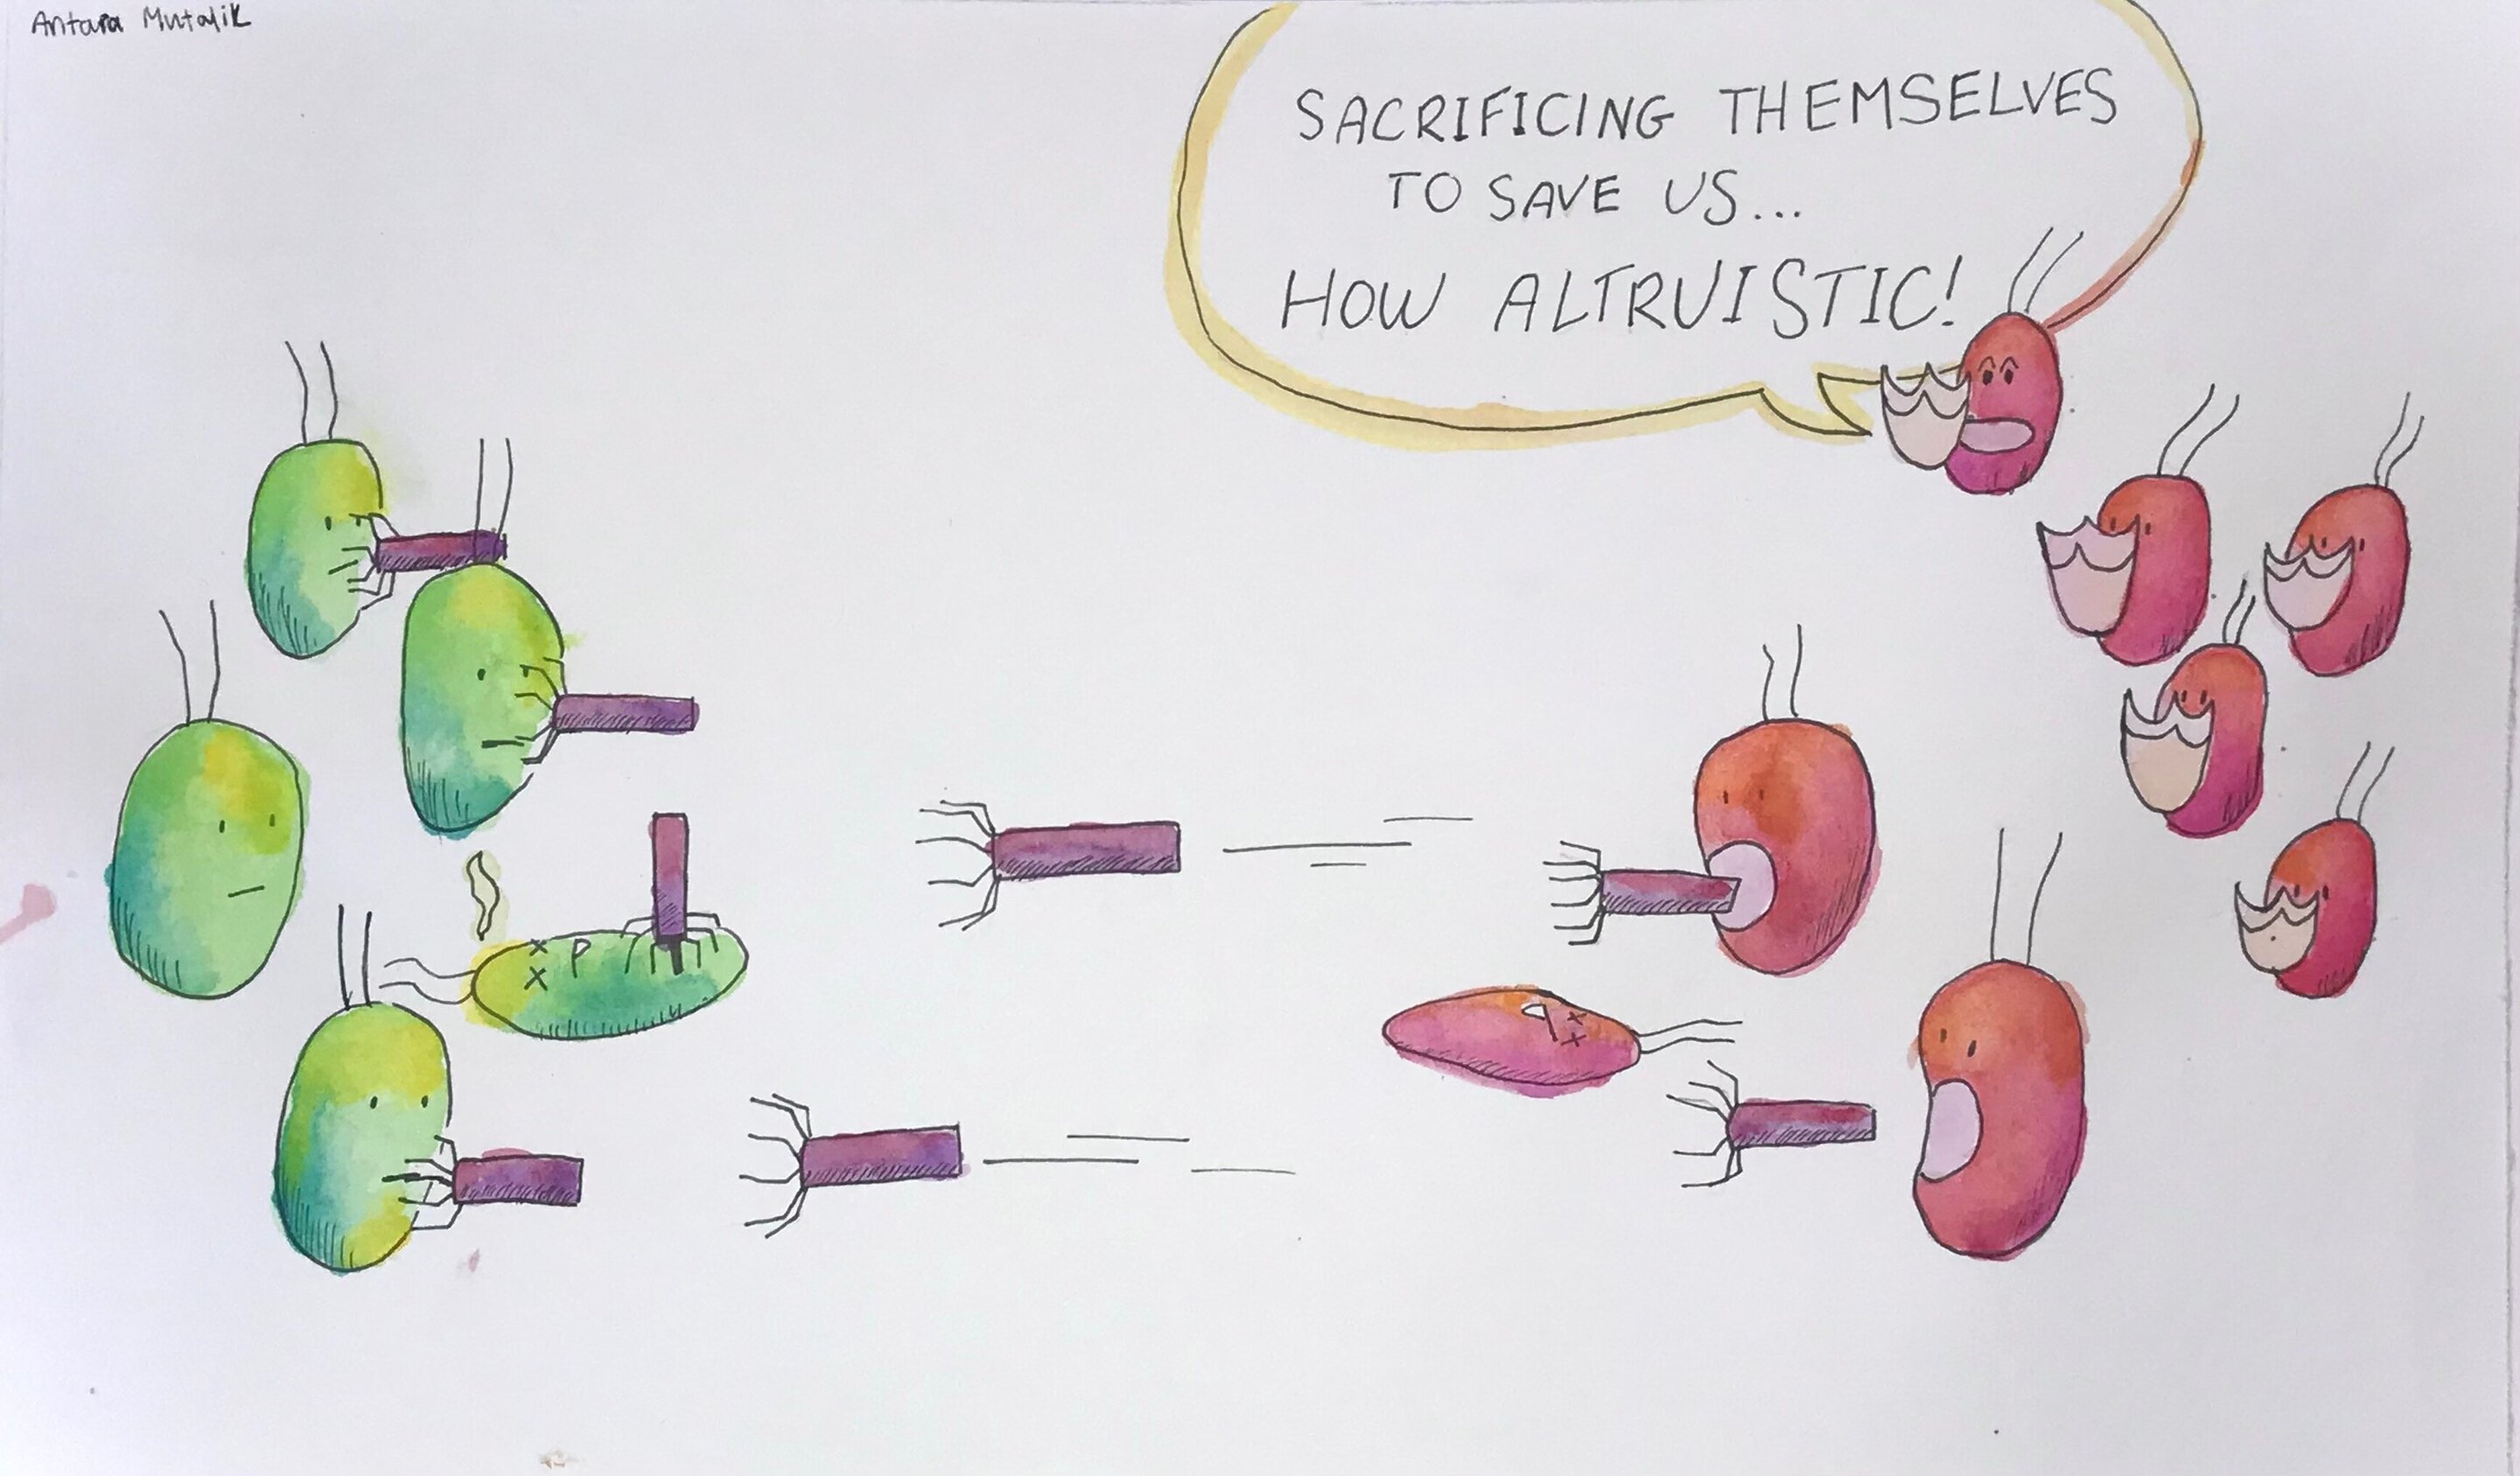 The incredible bacterial ‘homing missiles’ that scientists want to deploy